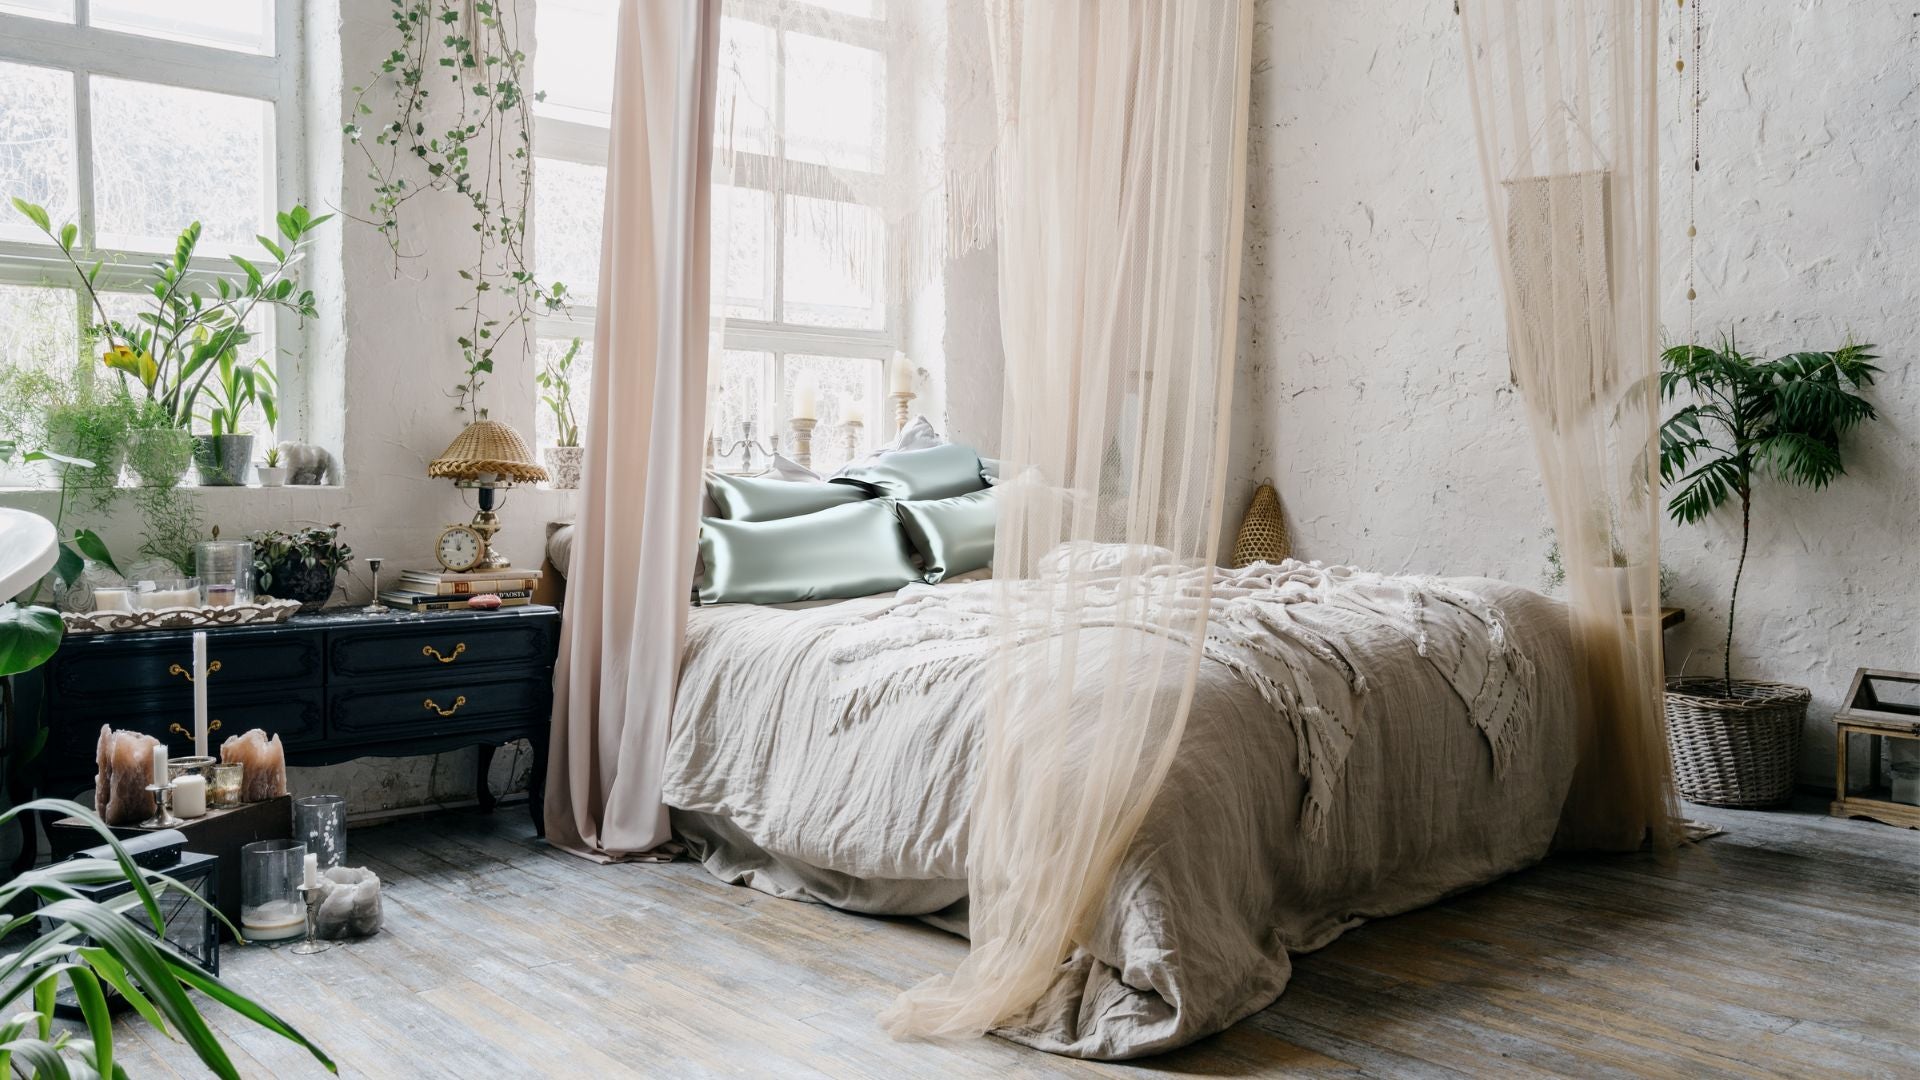 The Secret of Silk: Interior Designers Reveal How to Create a Bedroom Oasis